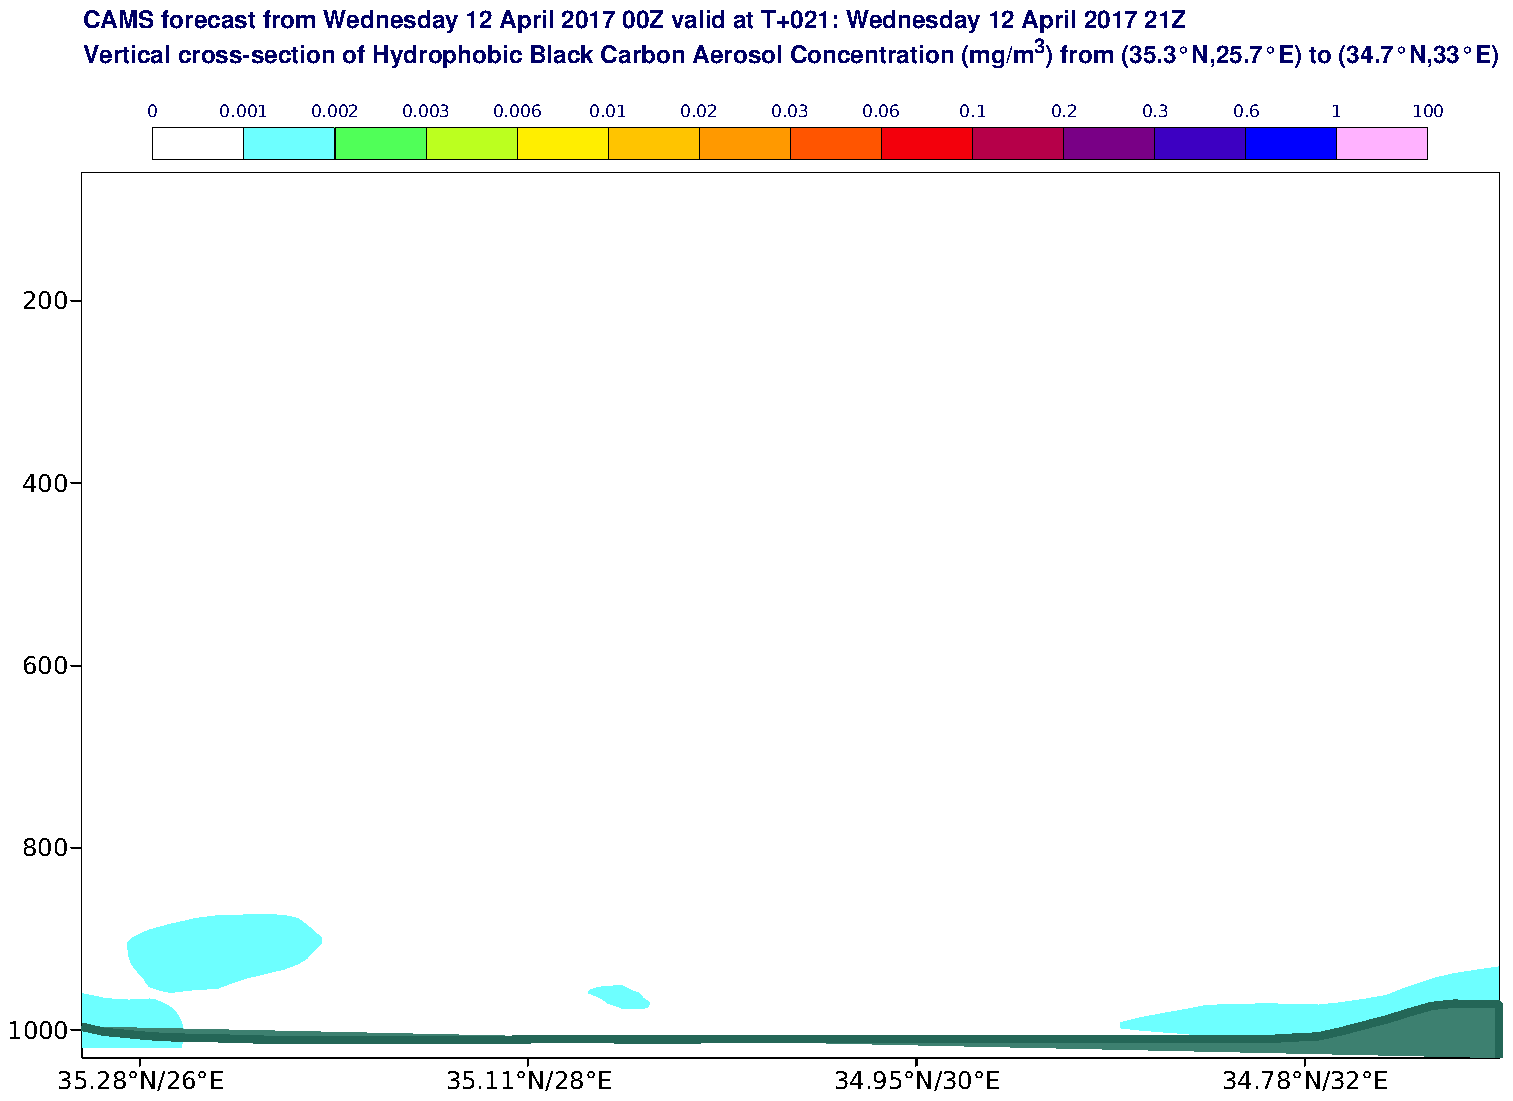 Vertical cross-section of Hydrophobic Black Carbon Aerosol Concentration (mg/m3) valid at T21 - 2017-04-12 21:00